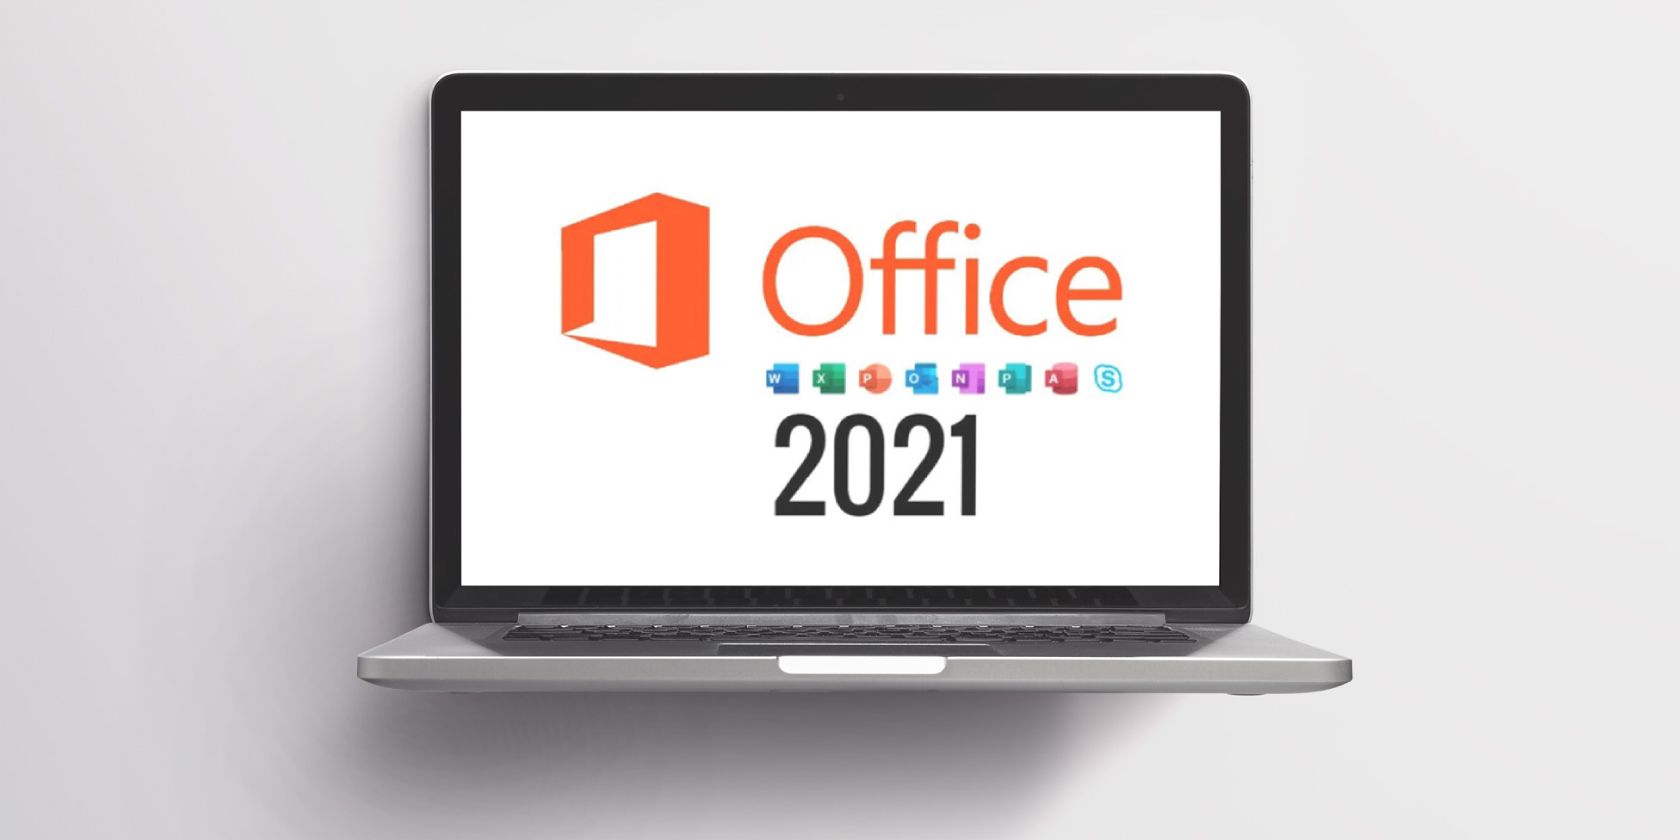 Microsoft Office 2021. Office 2021 стоимость. Office 2021 Home and Business. Офис 2021 года